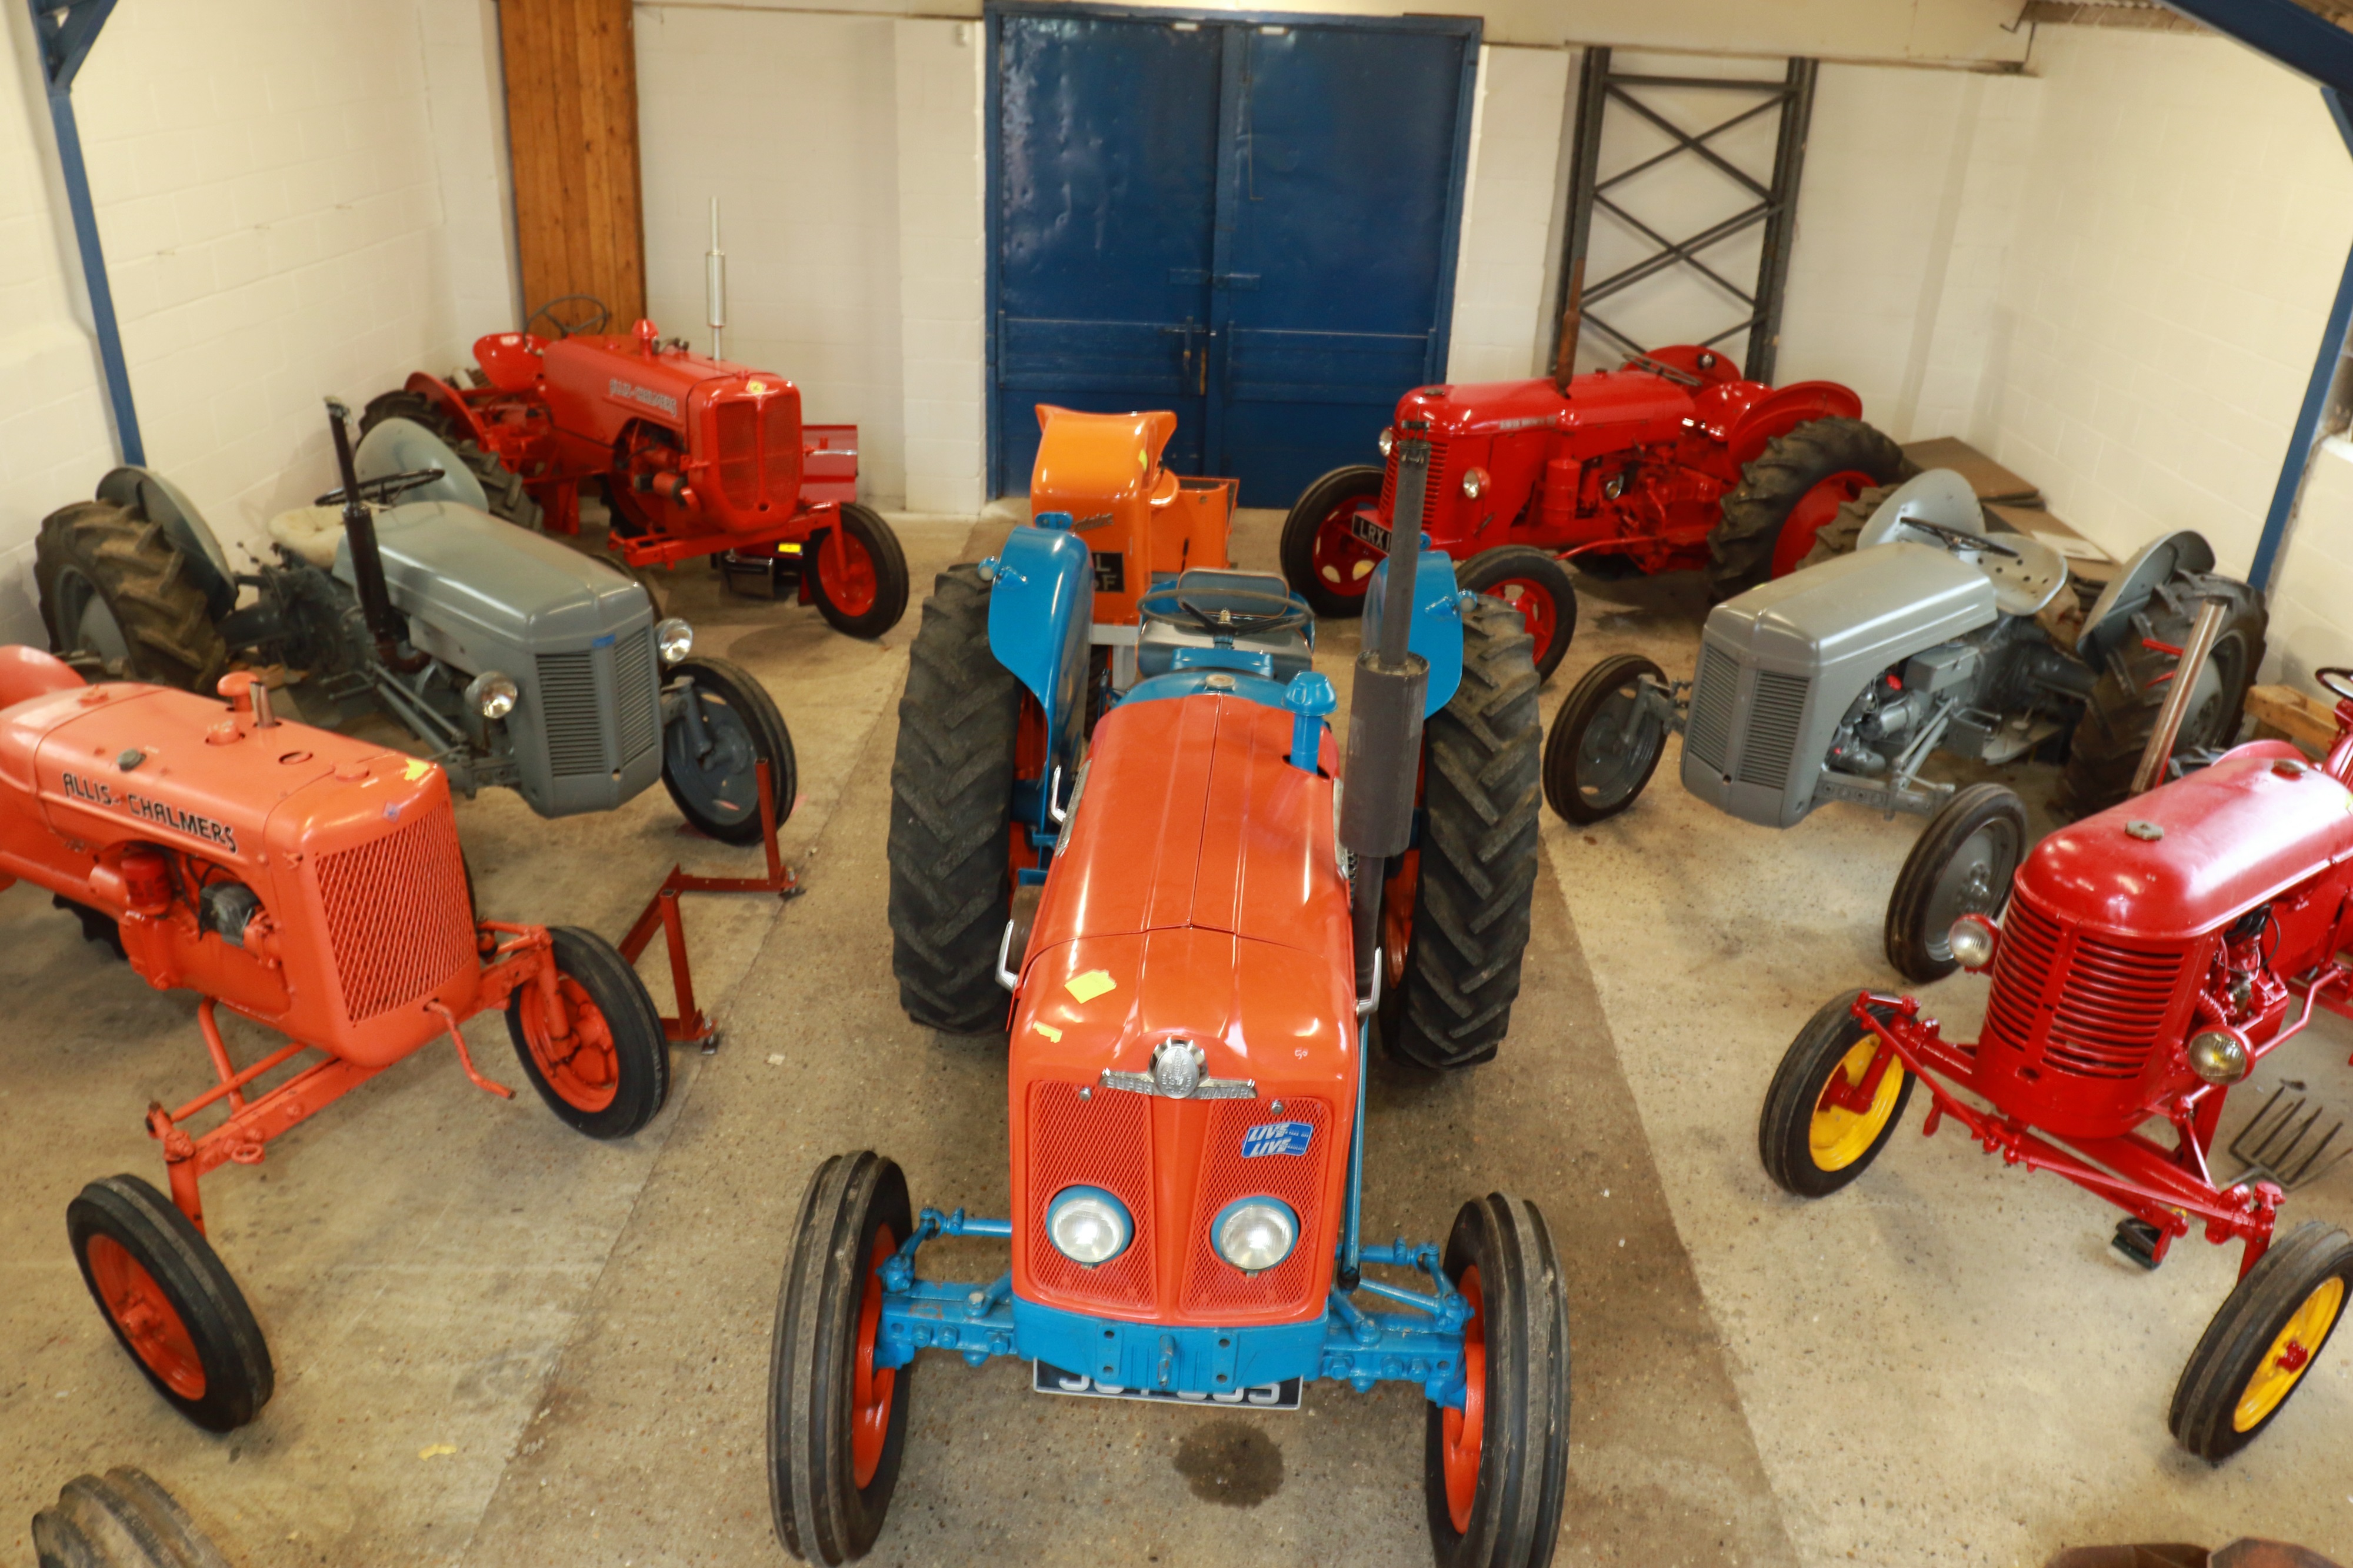 Single-Owner Collection Of Vintage Tractors, Farm Machinery And Rural Bygones To Go Under The Hammer